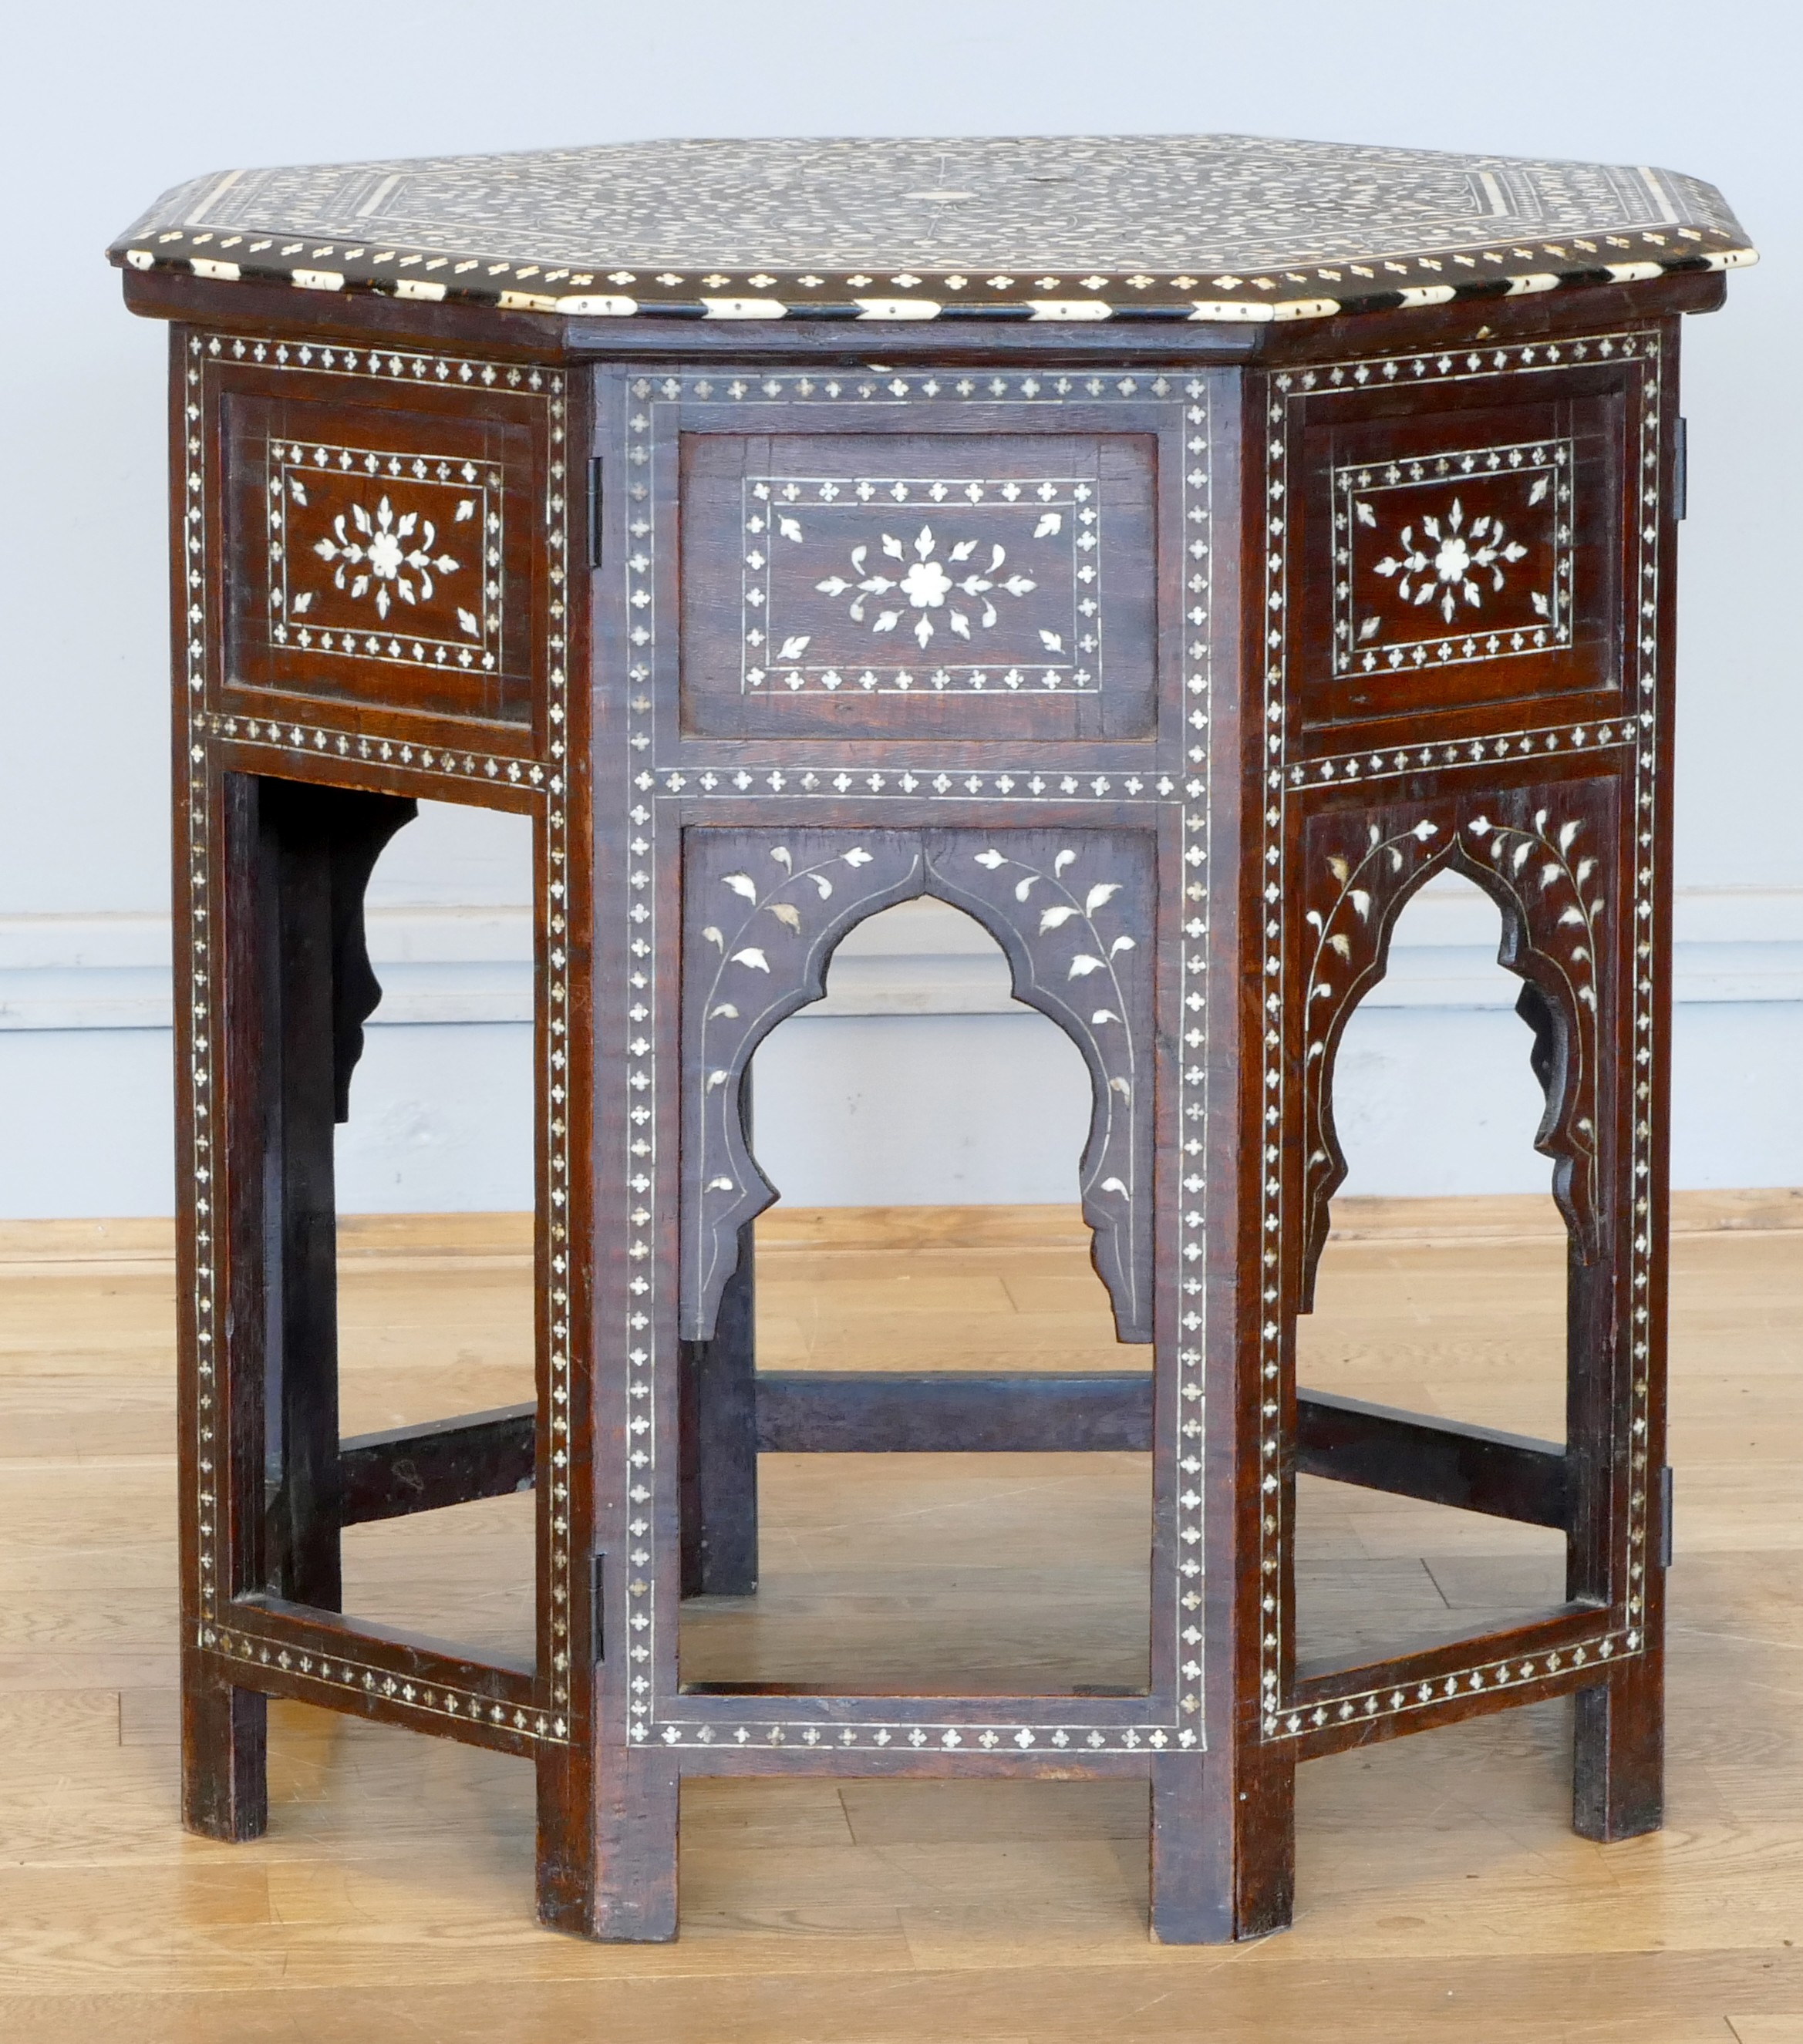 A late 19th century inlaid hardwood Anglo Indian octagonal side table, the top with central panel